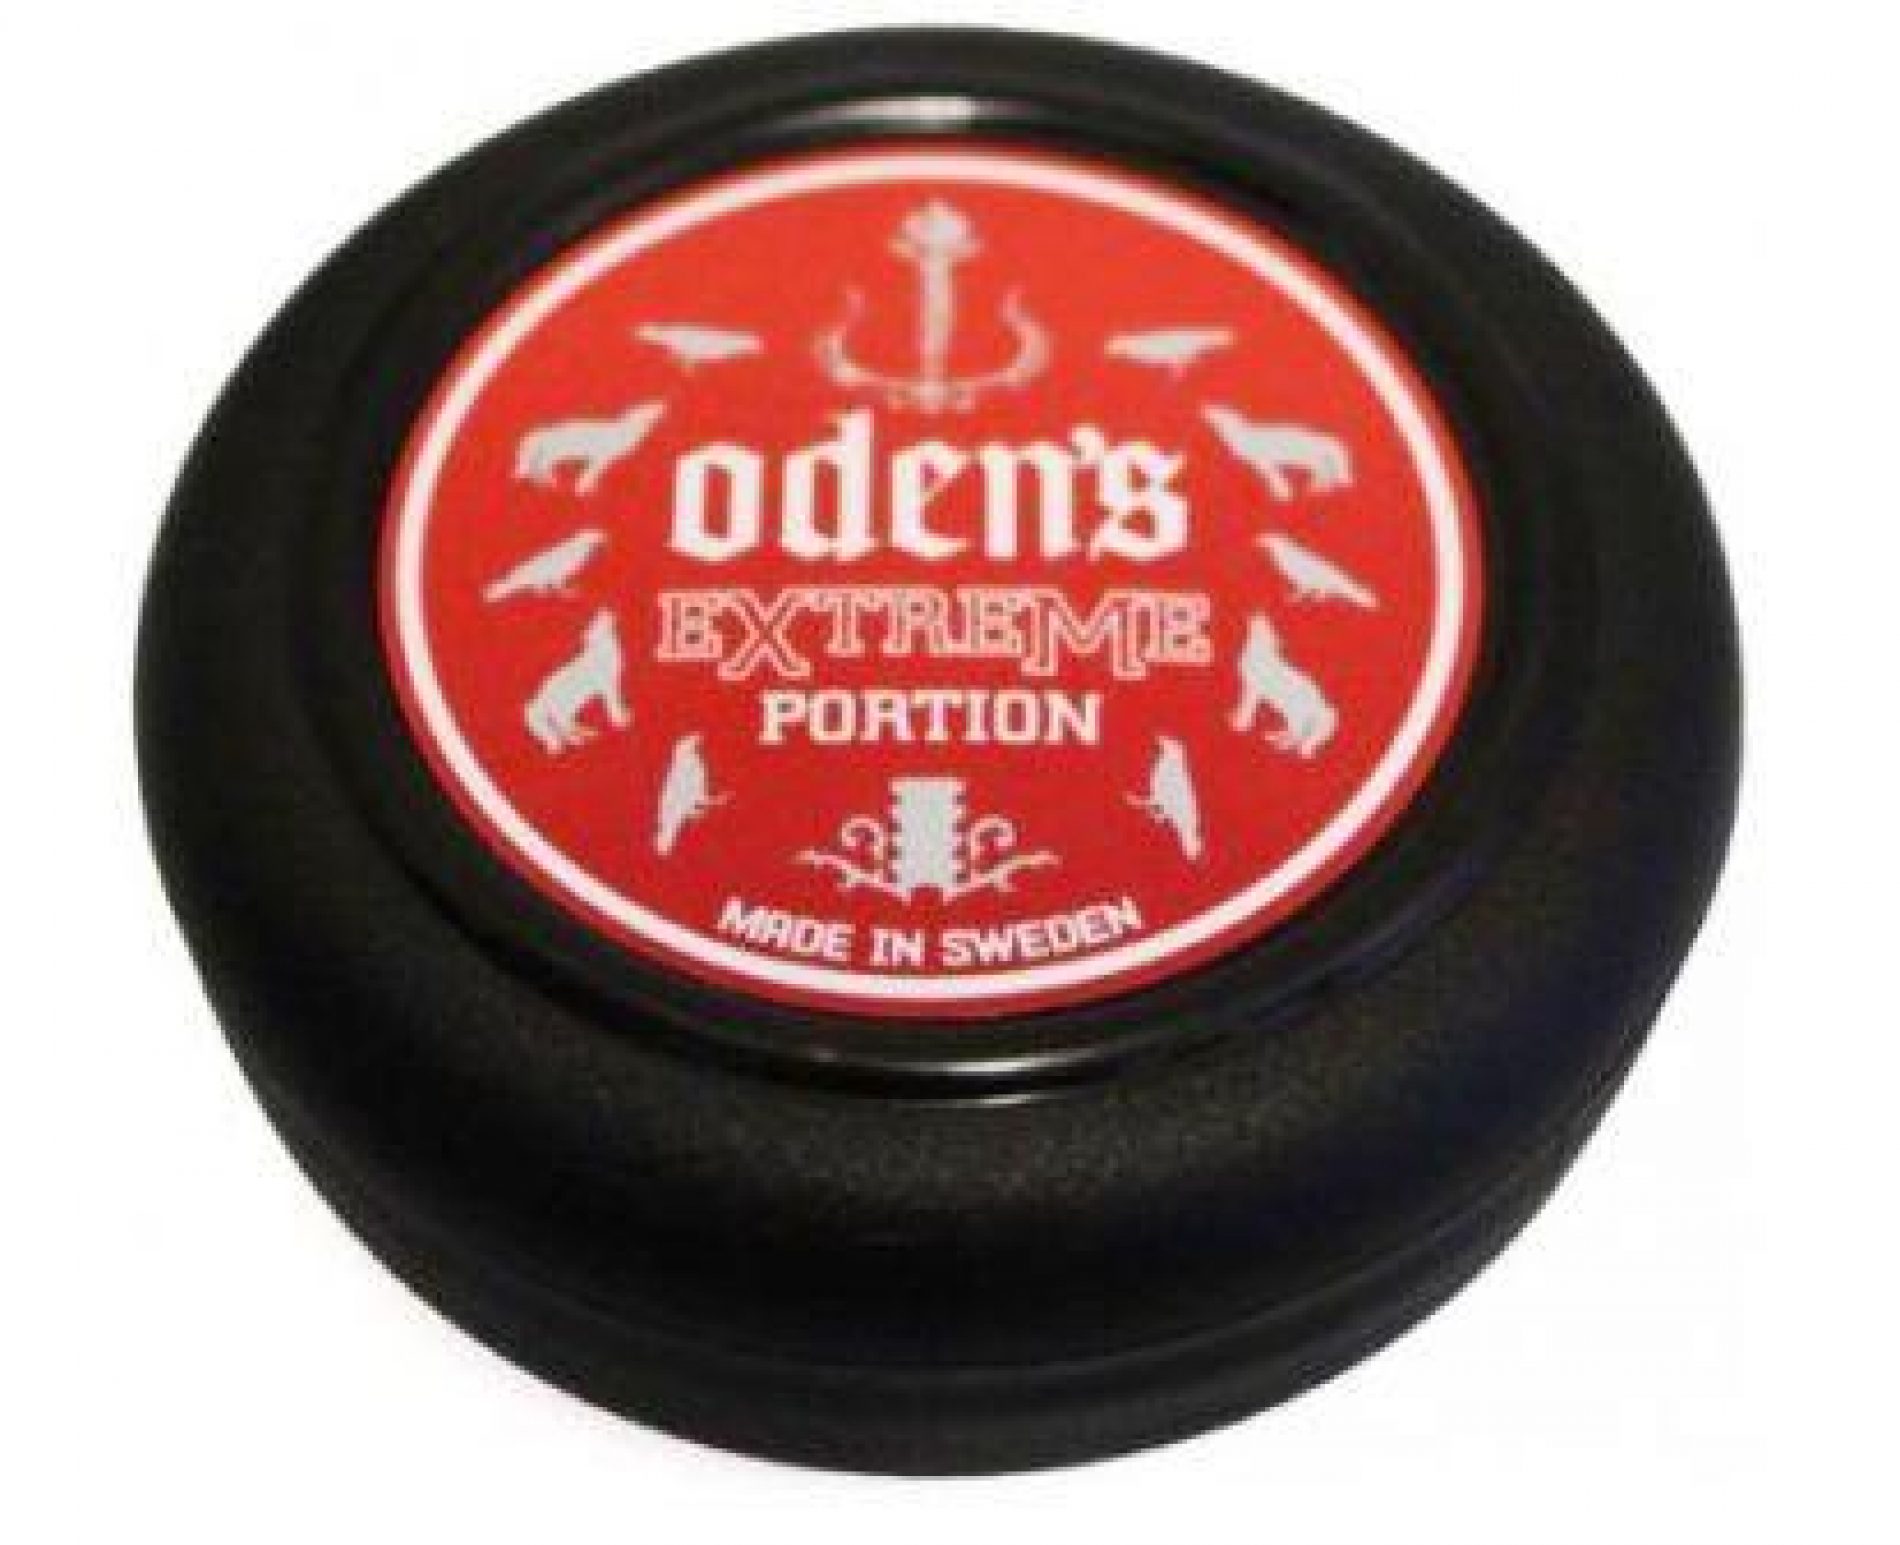 Going Extreme:  Odens EXTREME Snus by GNT